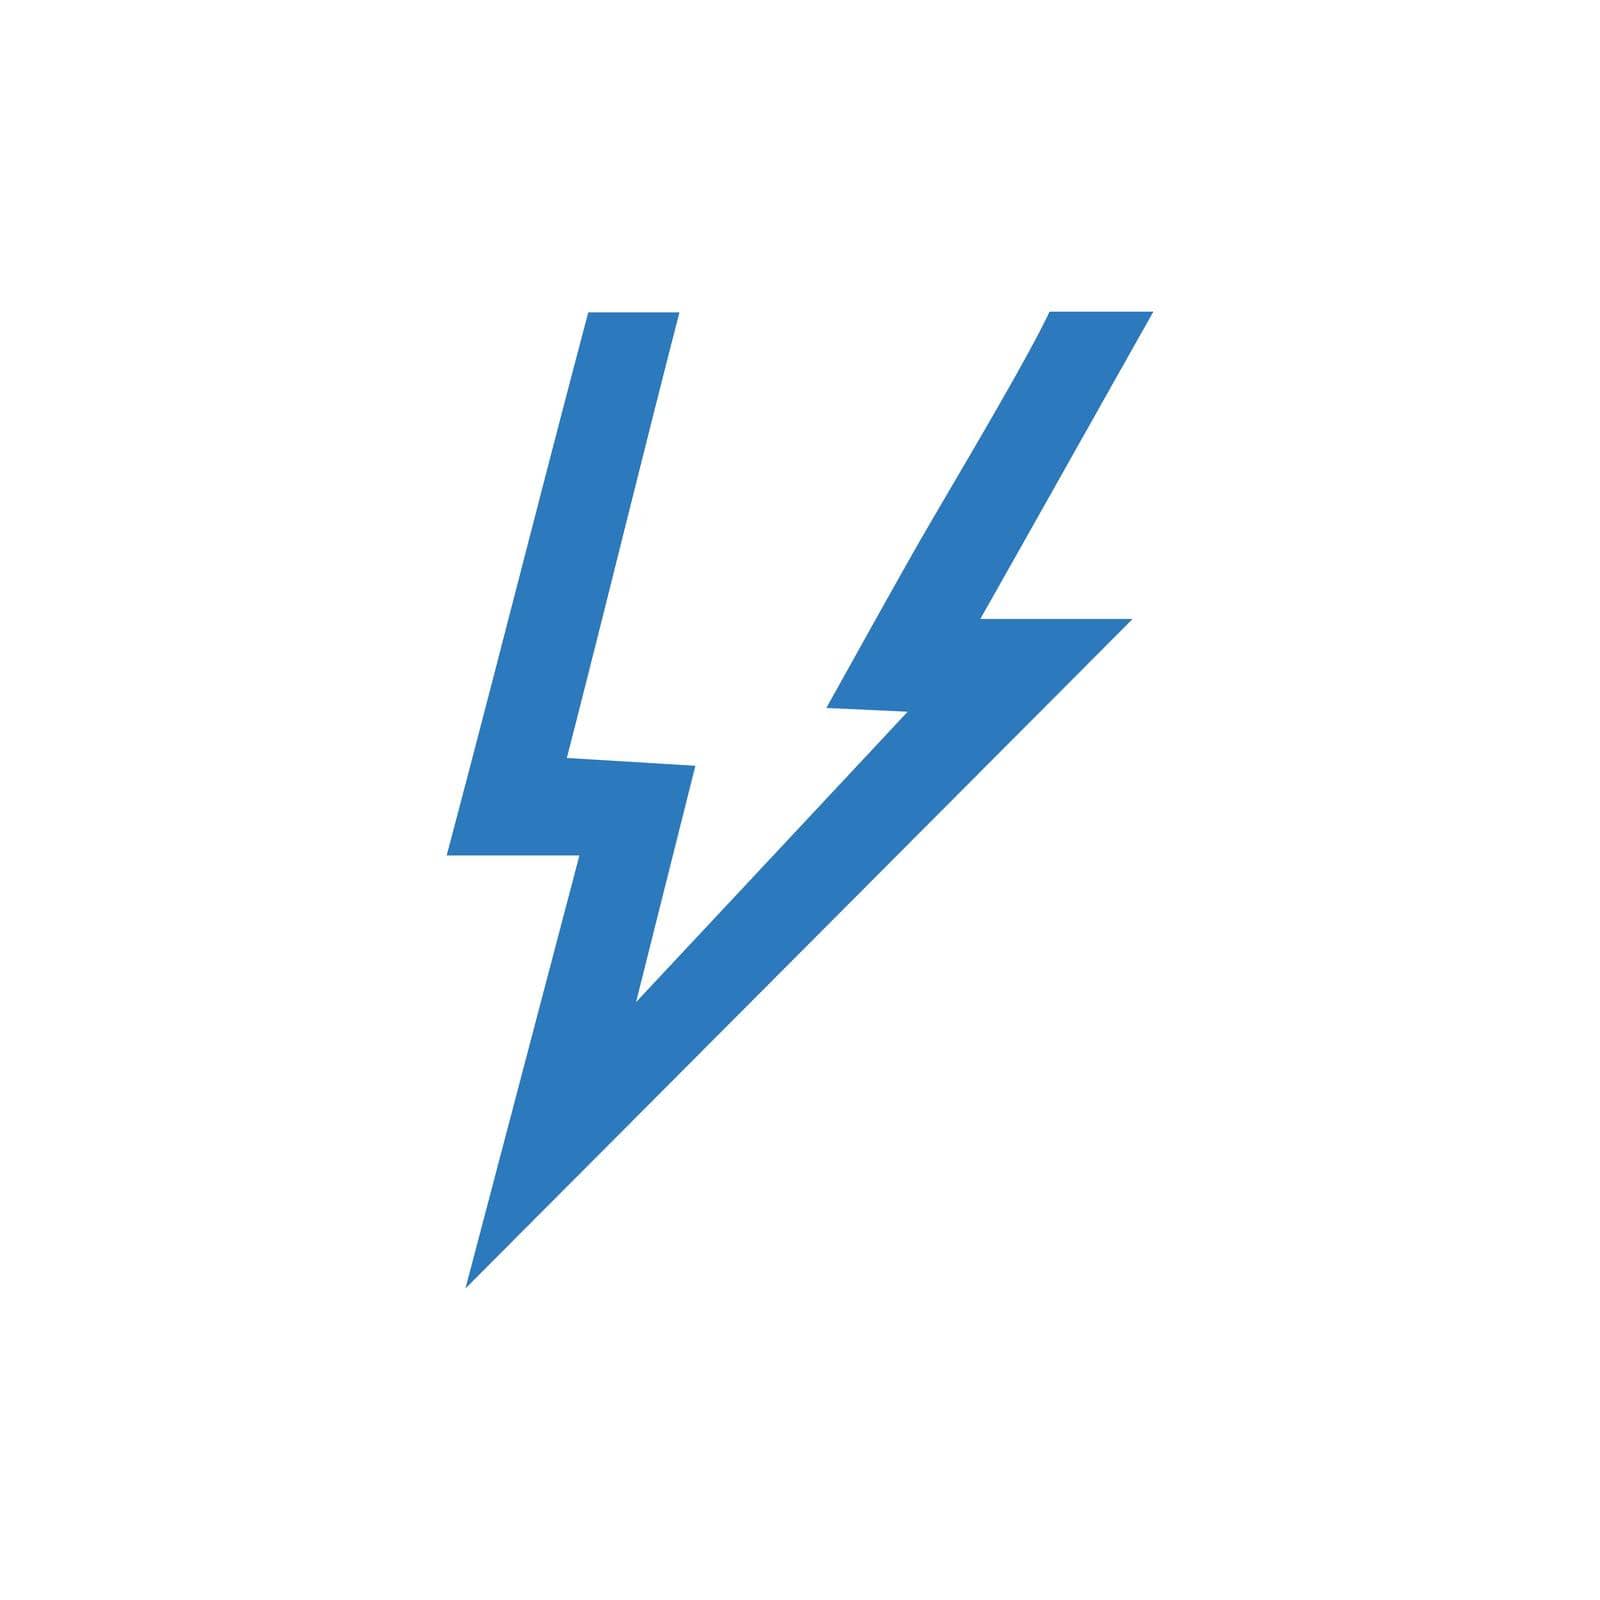 Thunder icon. Meticulously designed vector EPS file.